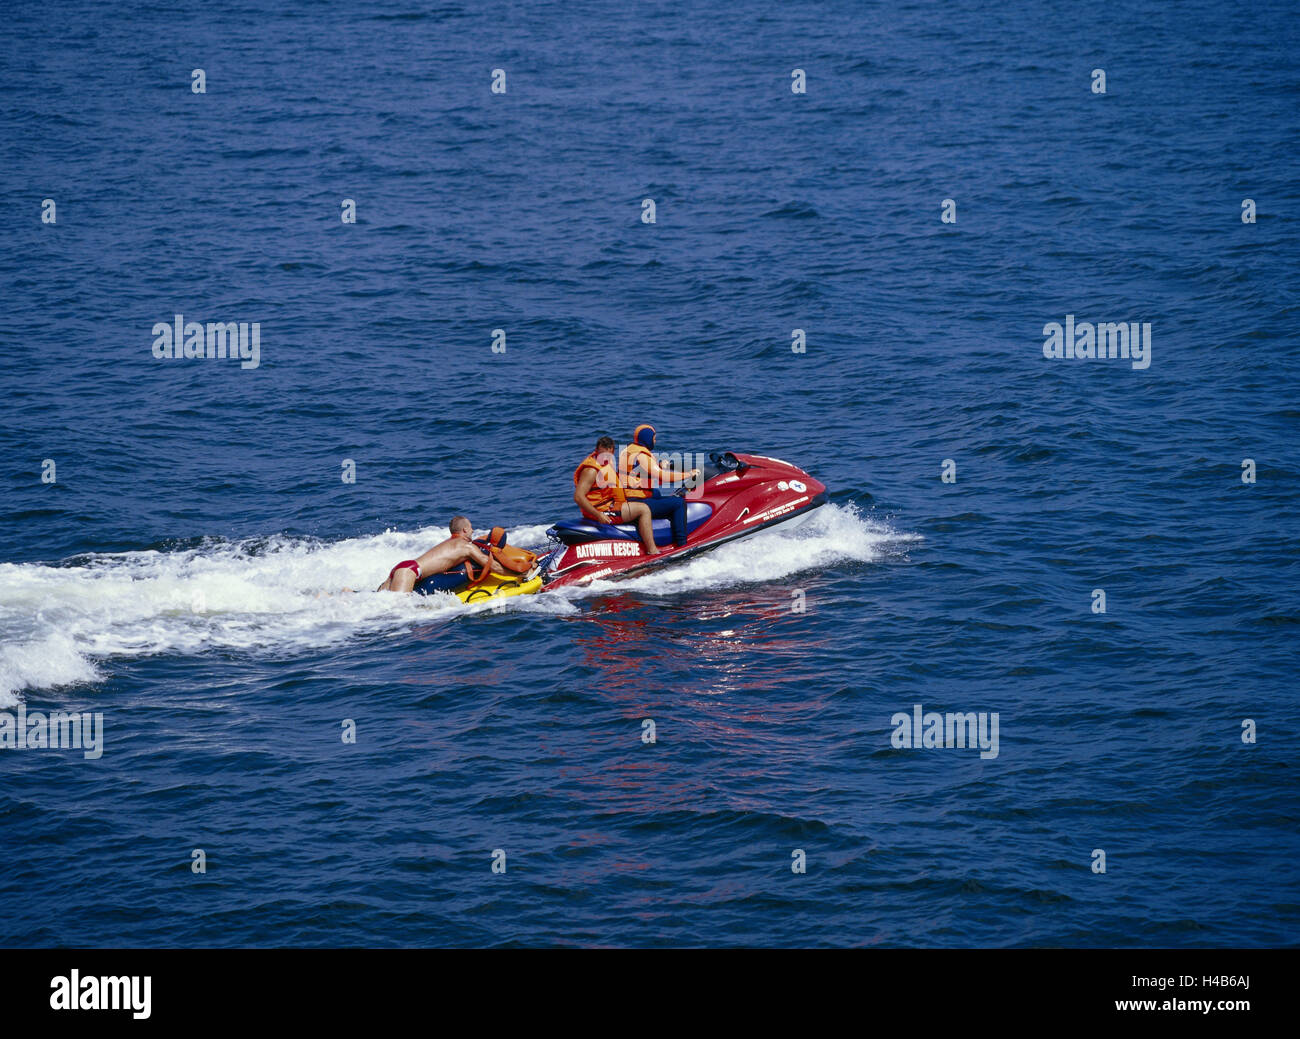 Poland, island Wollin, Misdroy, the Baltic Sea, water guard, jet ski, rescue, man, to west Pomeranians, seaside resort, Baltic bath, tourism, destination, sea, water, accident, misfortune, entry, rescue entry, help, tow, people, men, lifeguards, Stock Photo